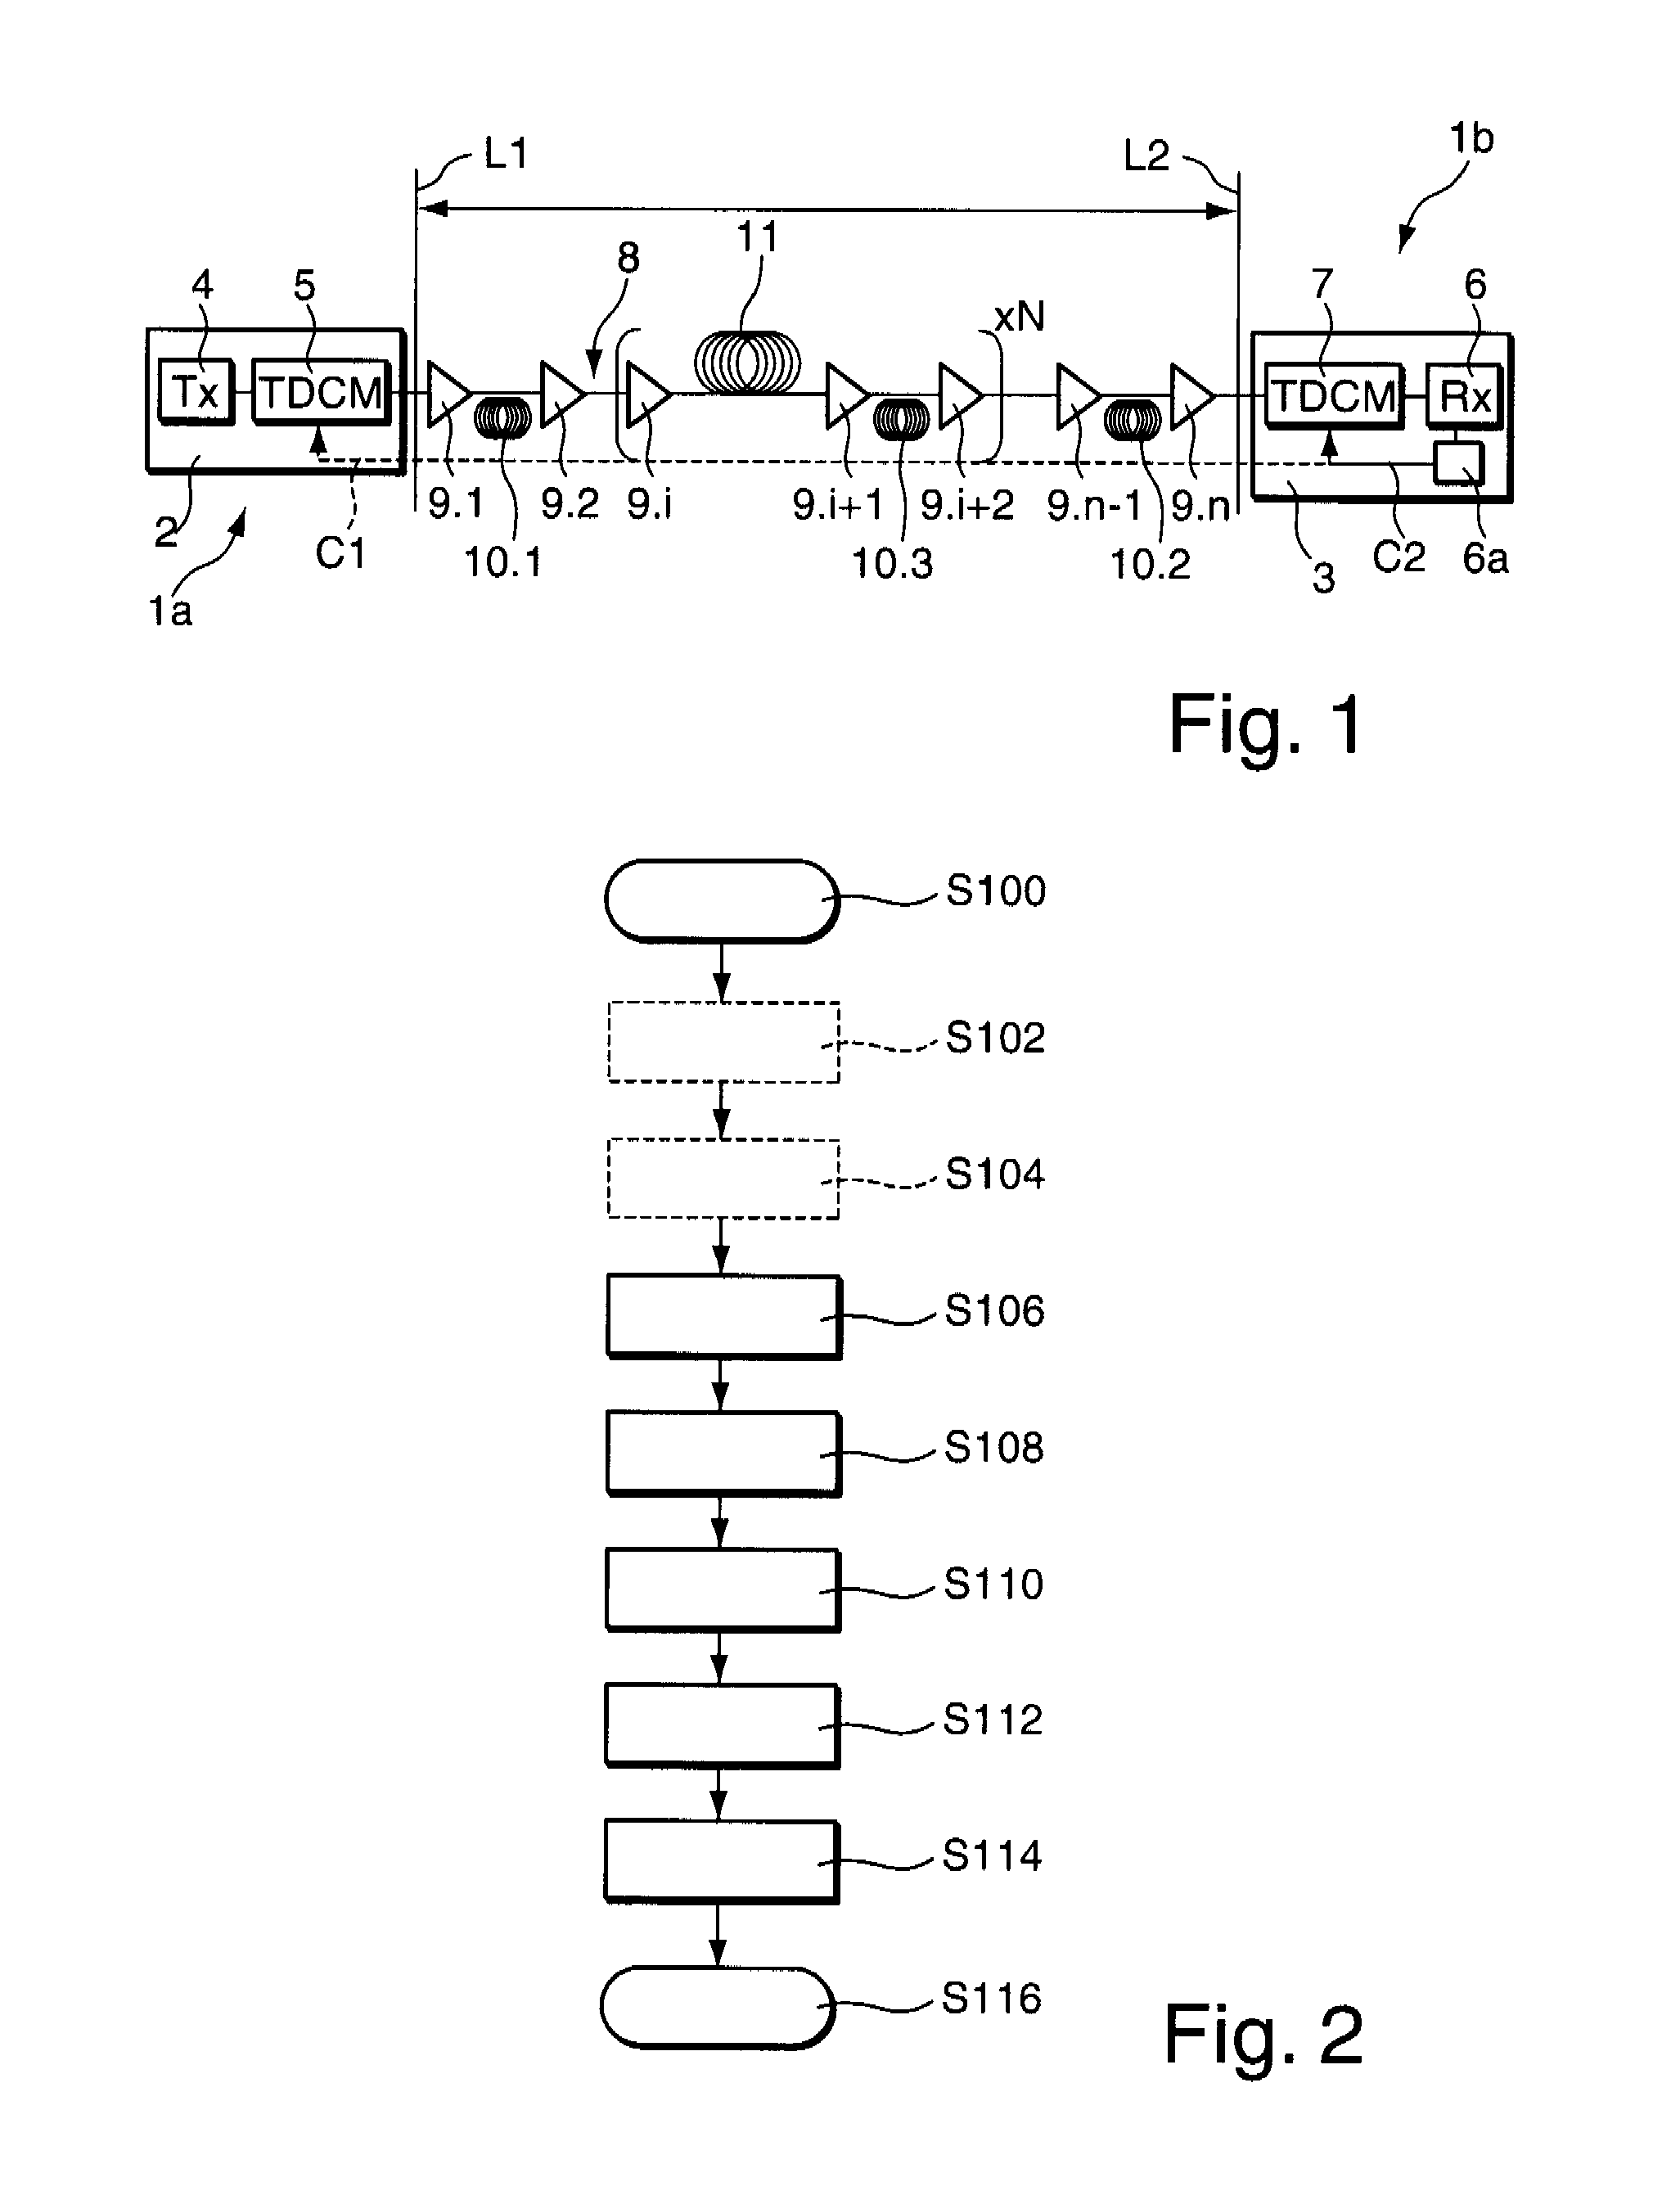 Method of operating and optimising a WDM transmission system and computer program product